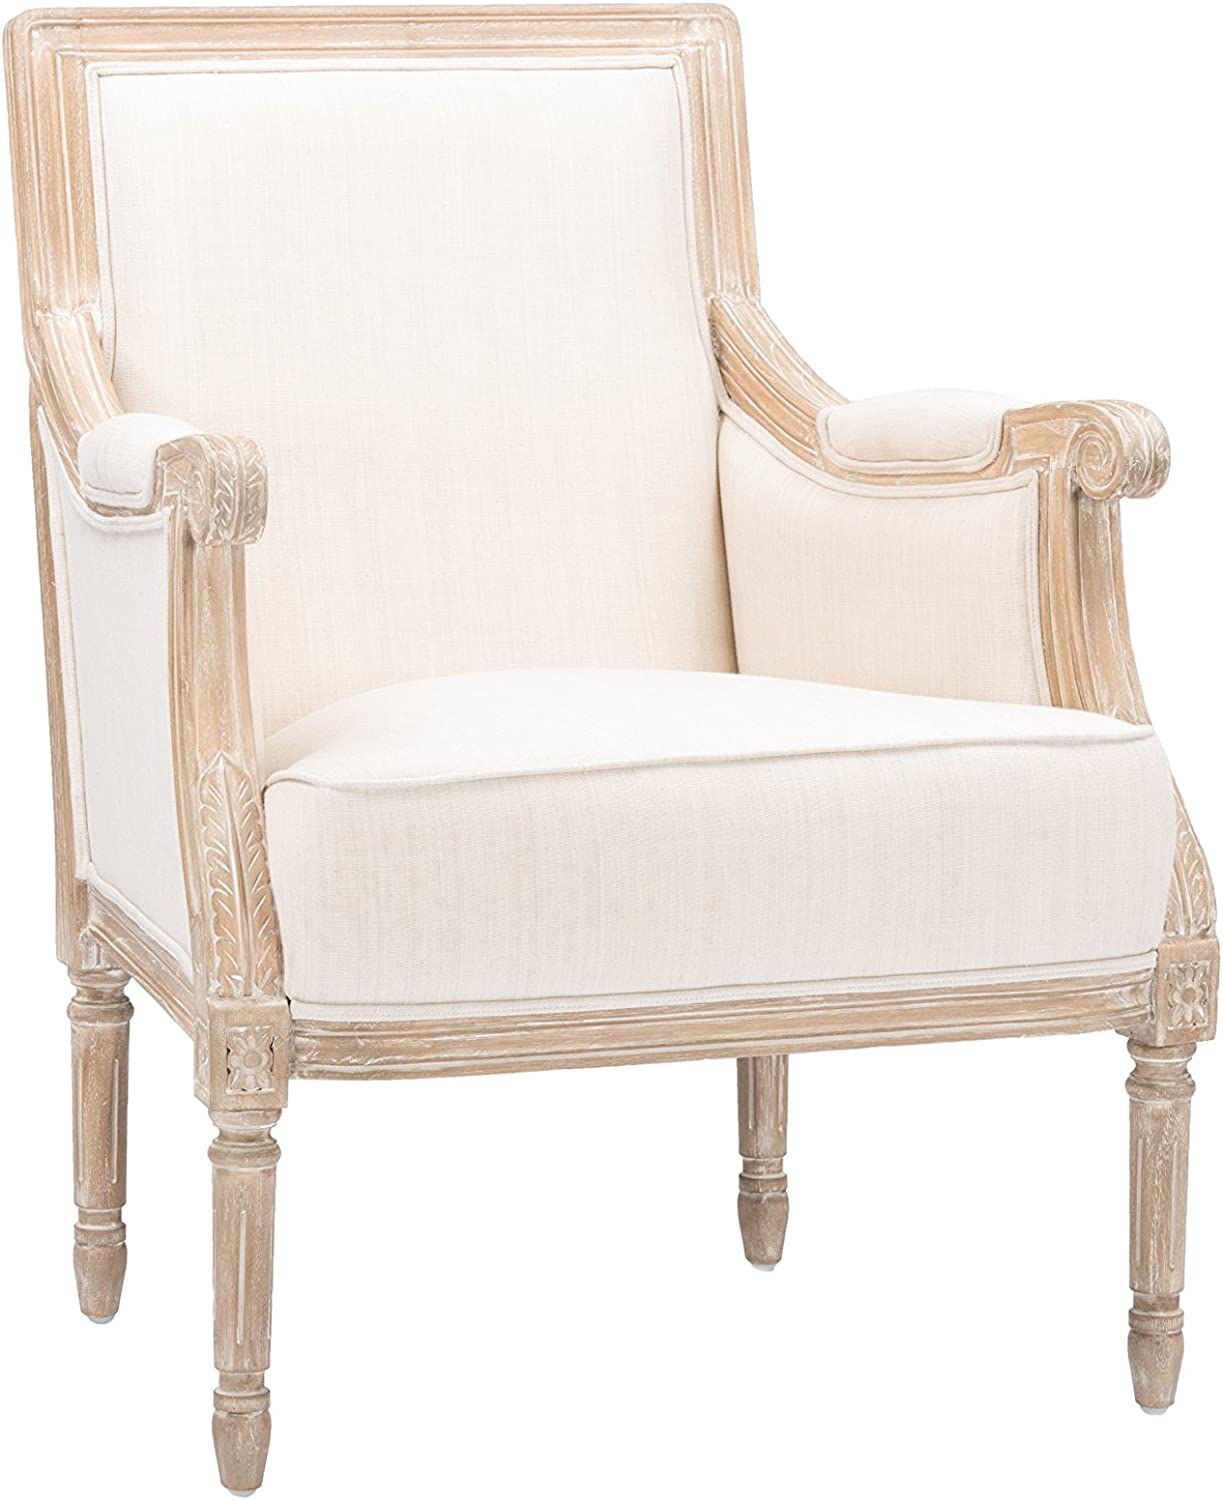 Baxton Studio Chavanon Wood and Linen Traditional French Accent Chair, Light Beige